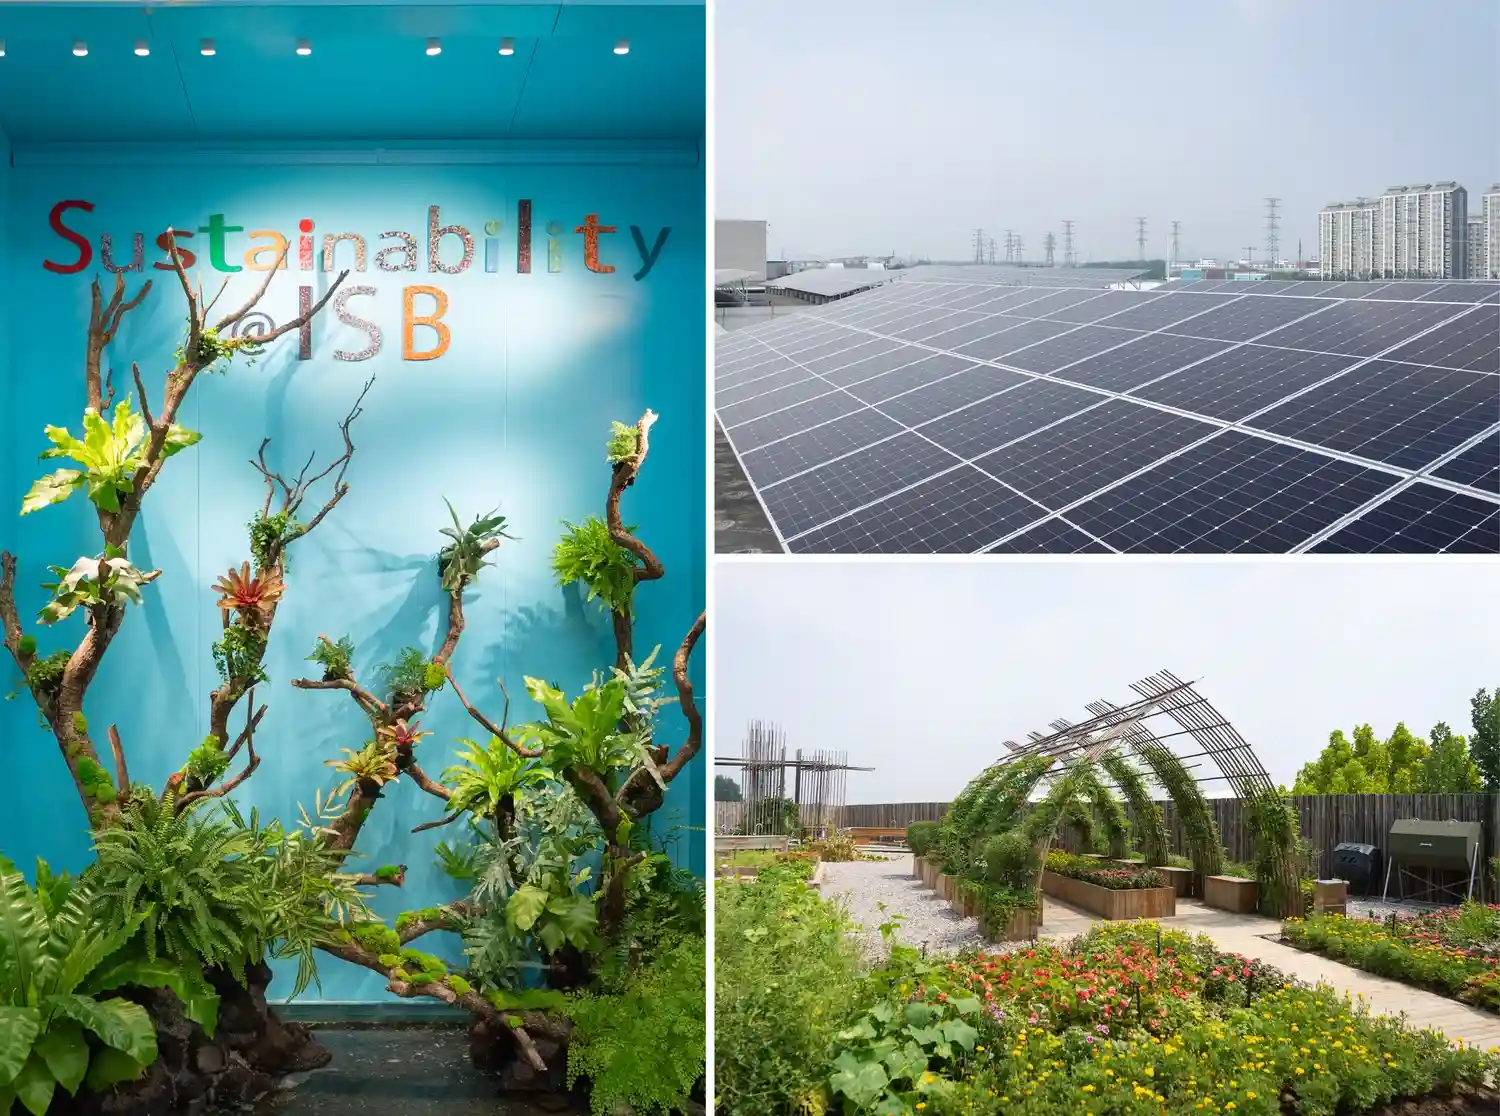 Solar Panels, in line with our Sustainability efforts this year, which also includes the elimination of single-use plastics WSGallery-ISB-post-first-day-5 The first day of school is nearly here...